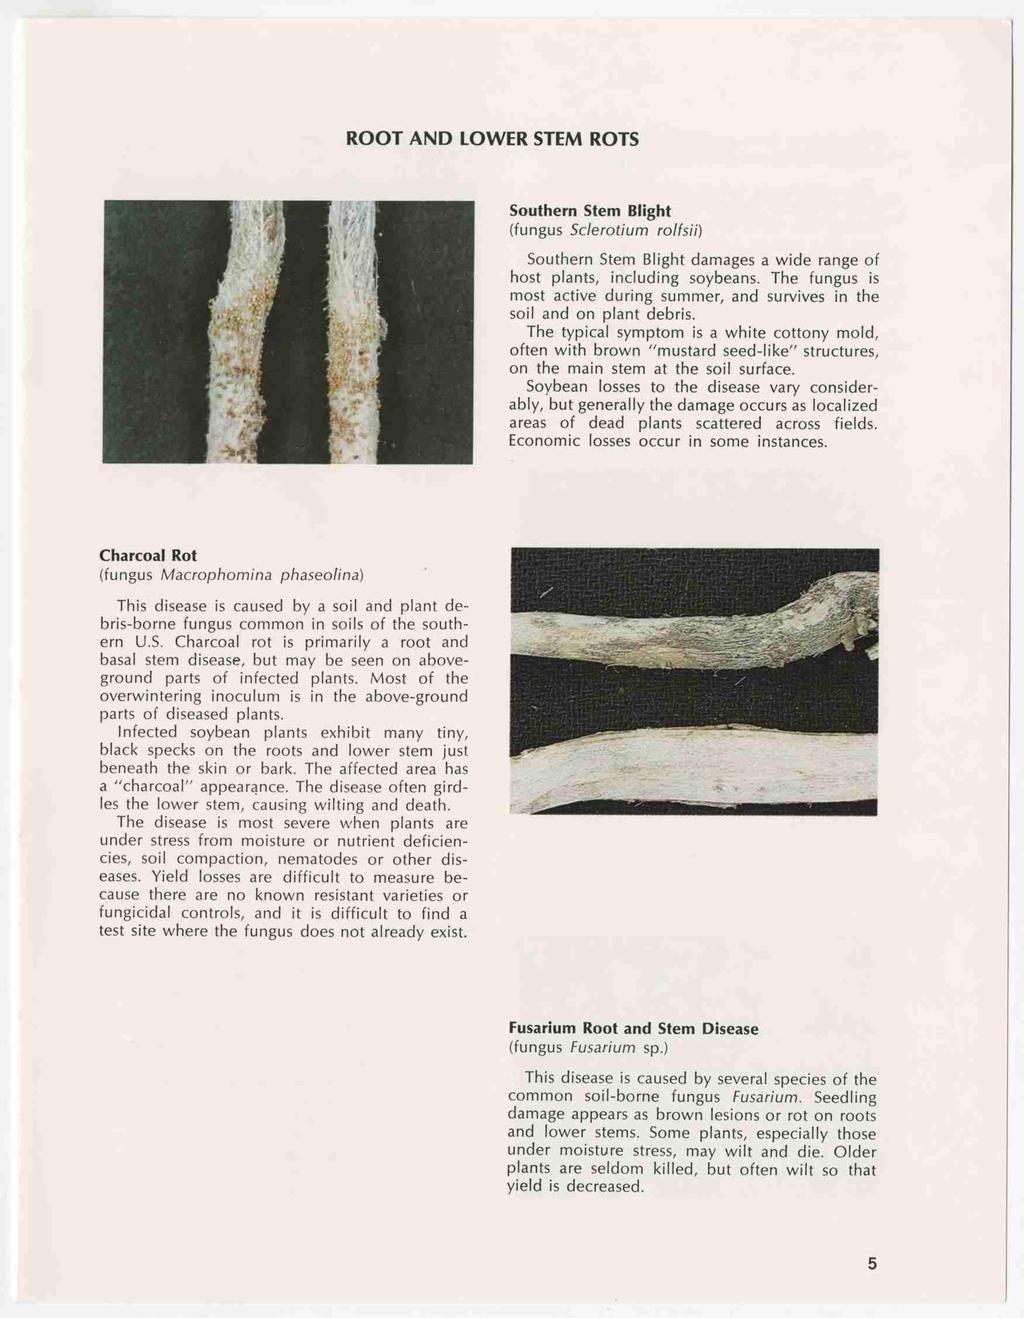 ROOT AND LOWER STEM ROTS Southern Stem Blight (fungus Sclerotium ro/fsii) Southern Stem Blight damages a wide range of host plants, including soybeans.